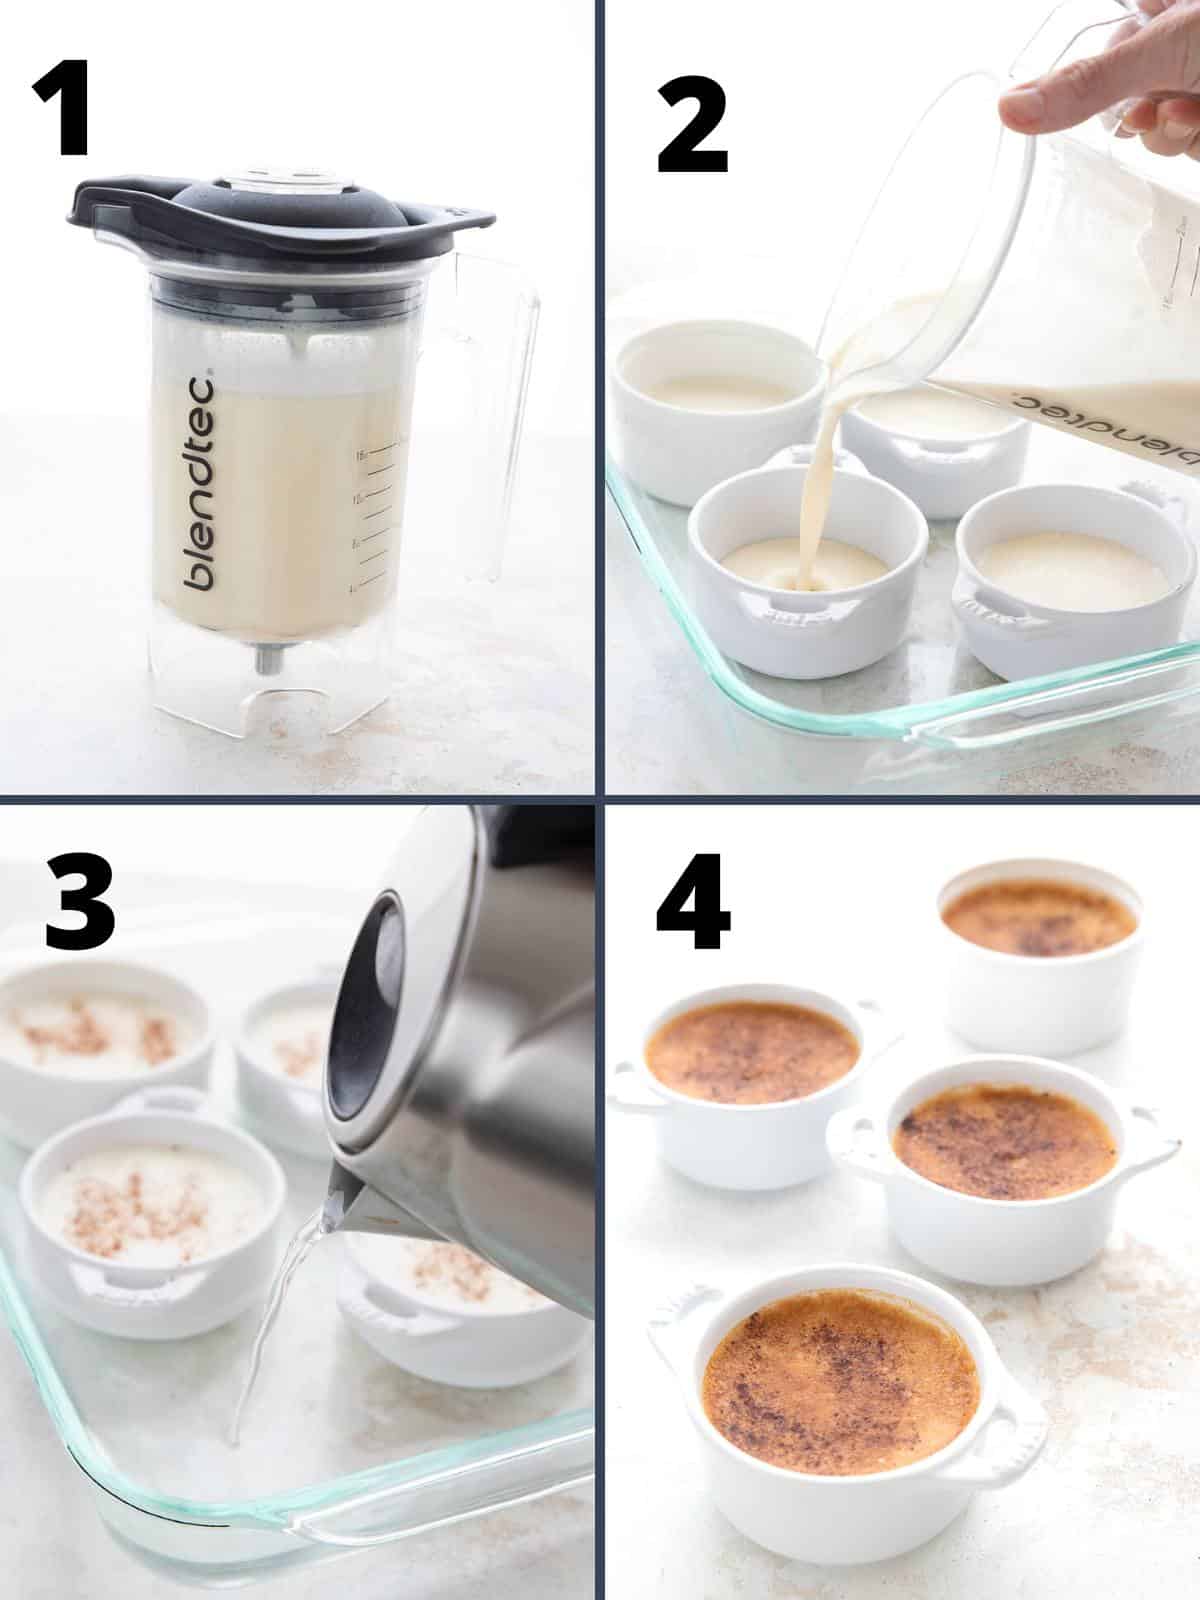 A collage of 4 images showing the steps for making keto custard.